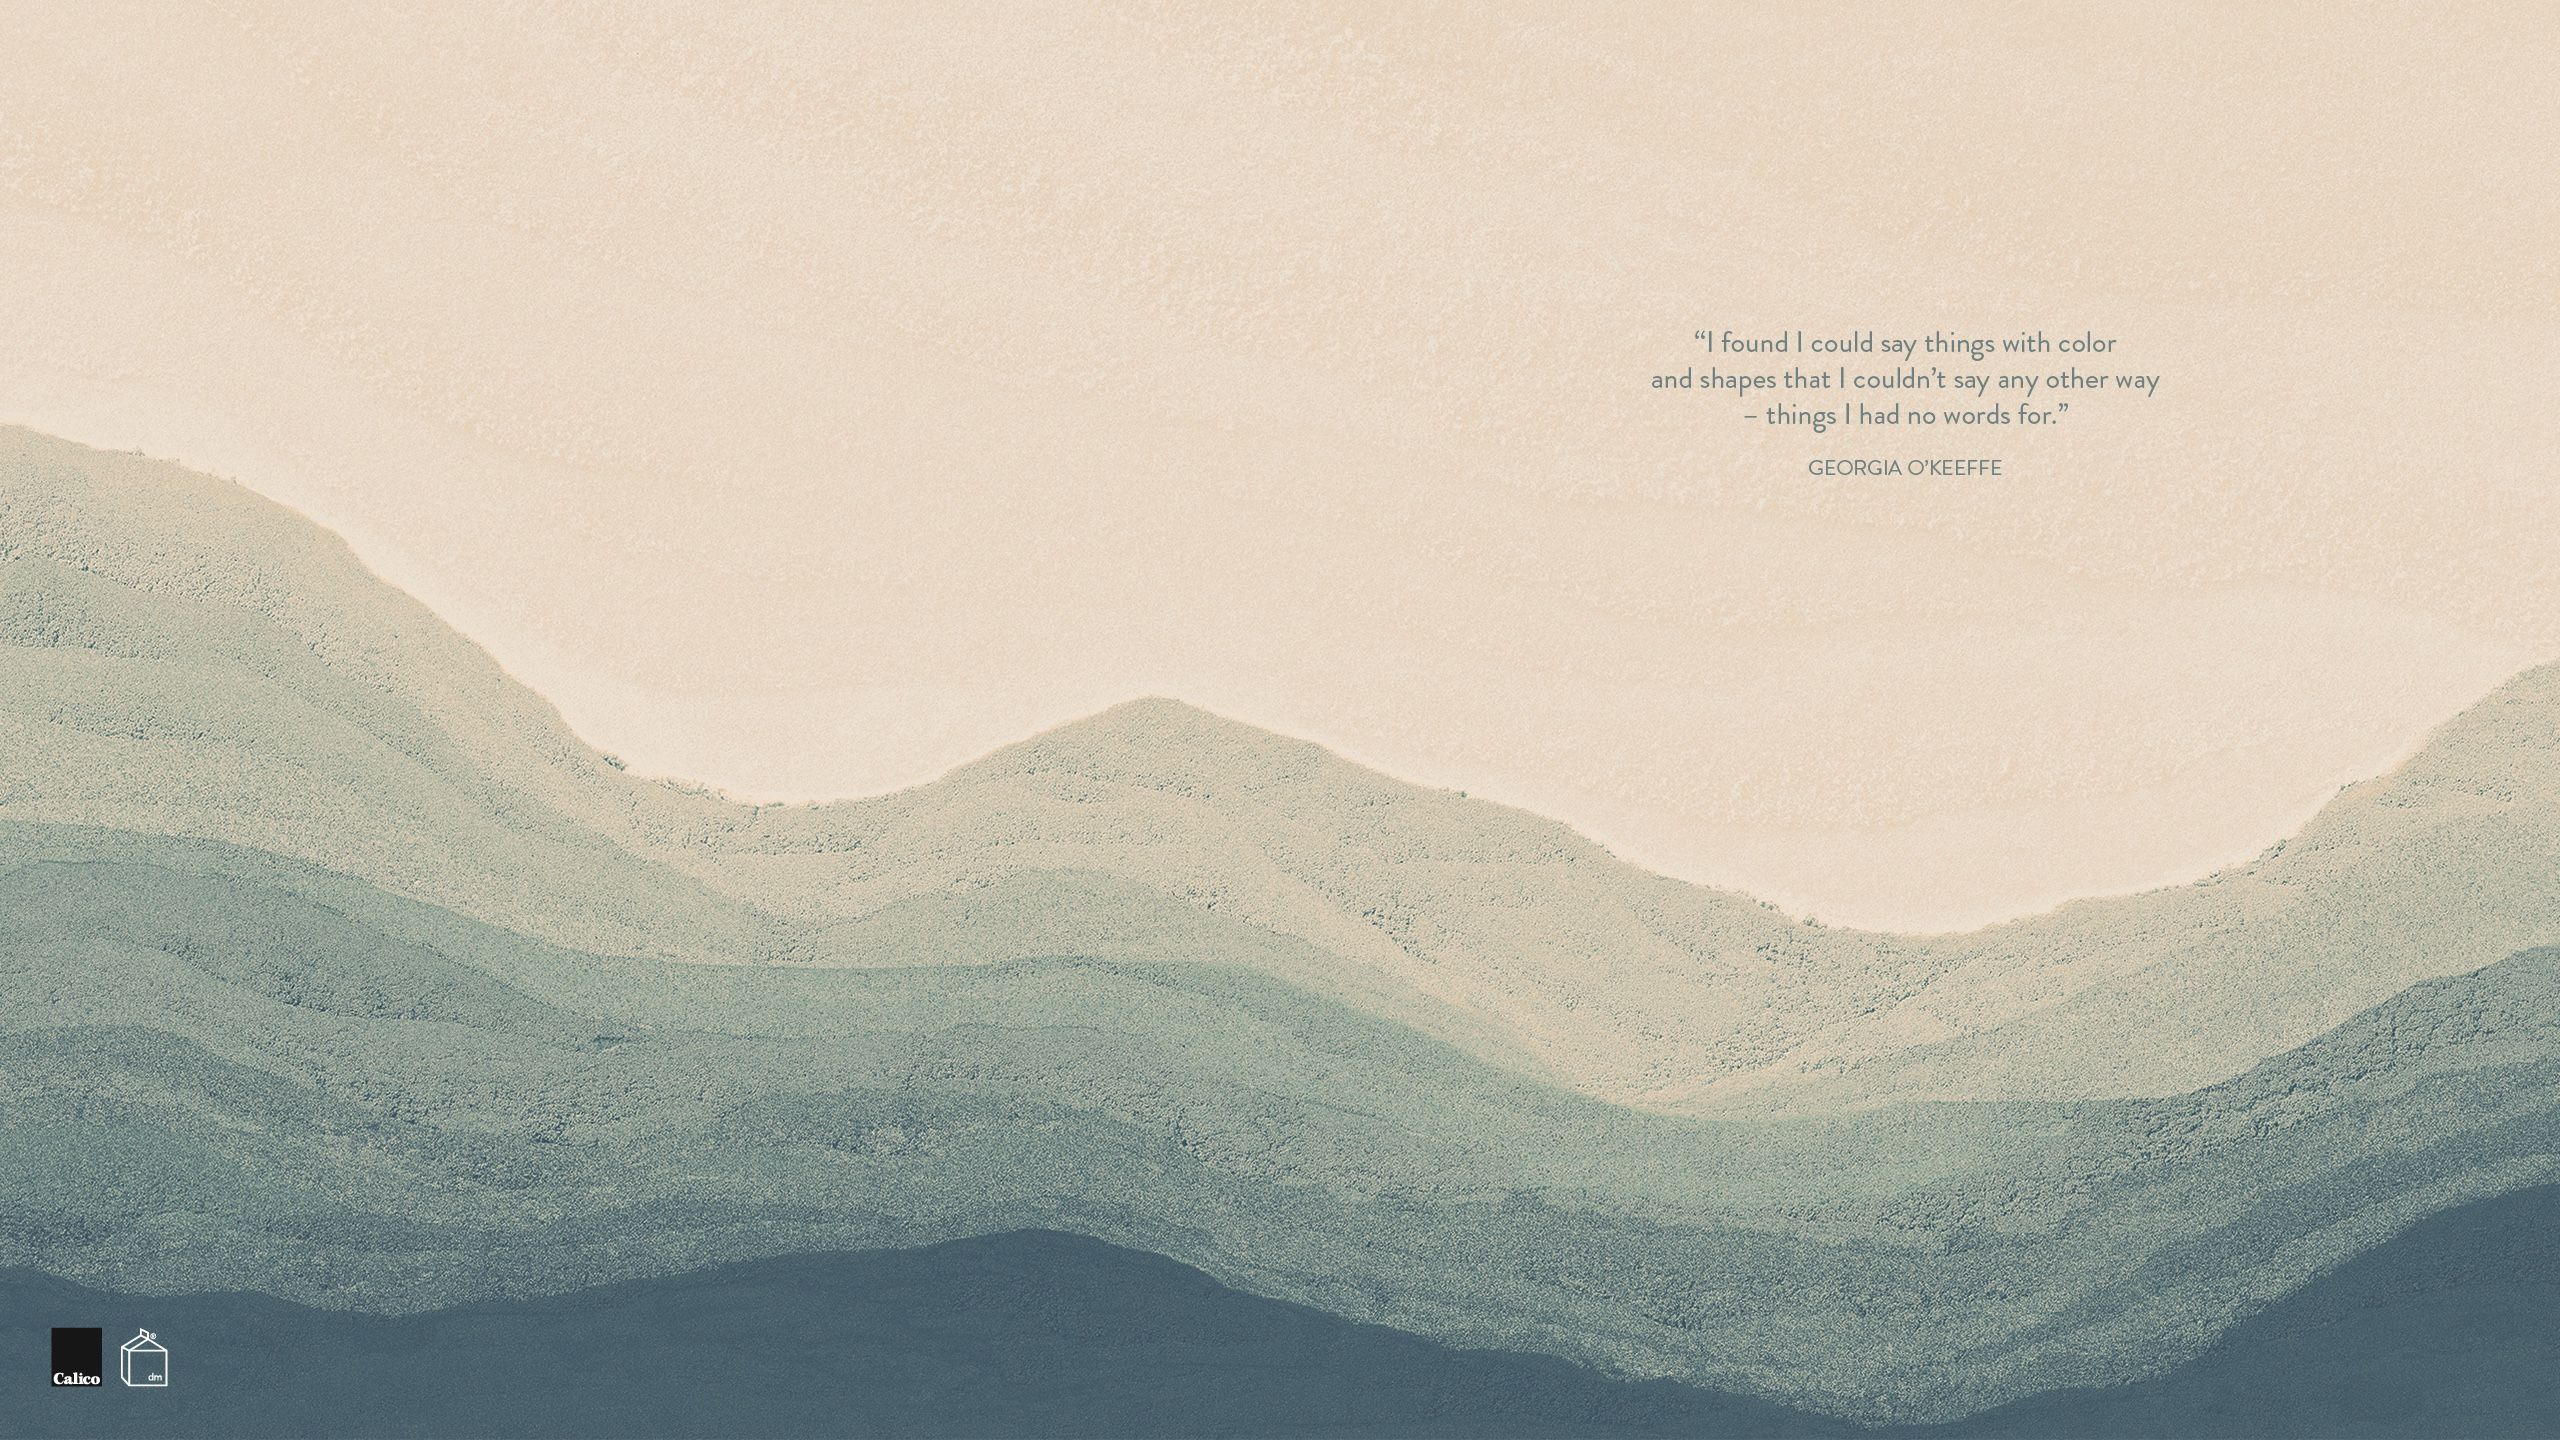 A digital illustration of a quote by Georgia O'Keeffe, set against a background of a pale mountain range. - Clean